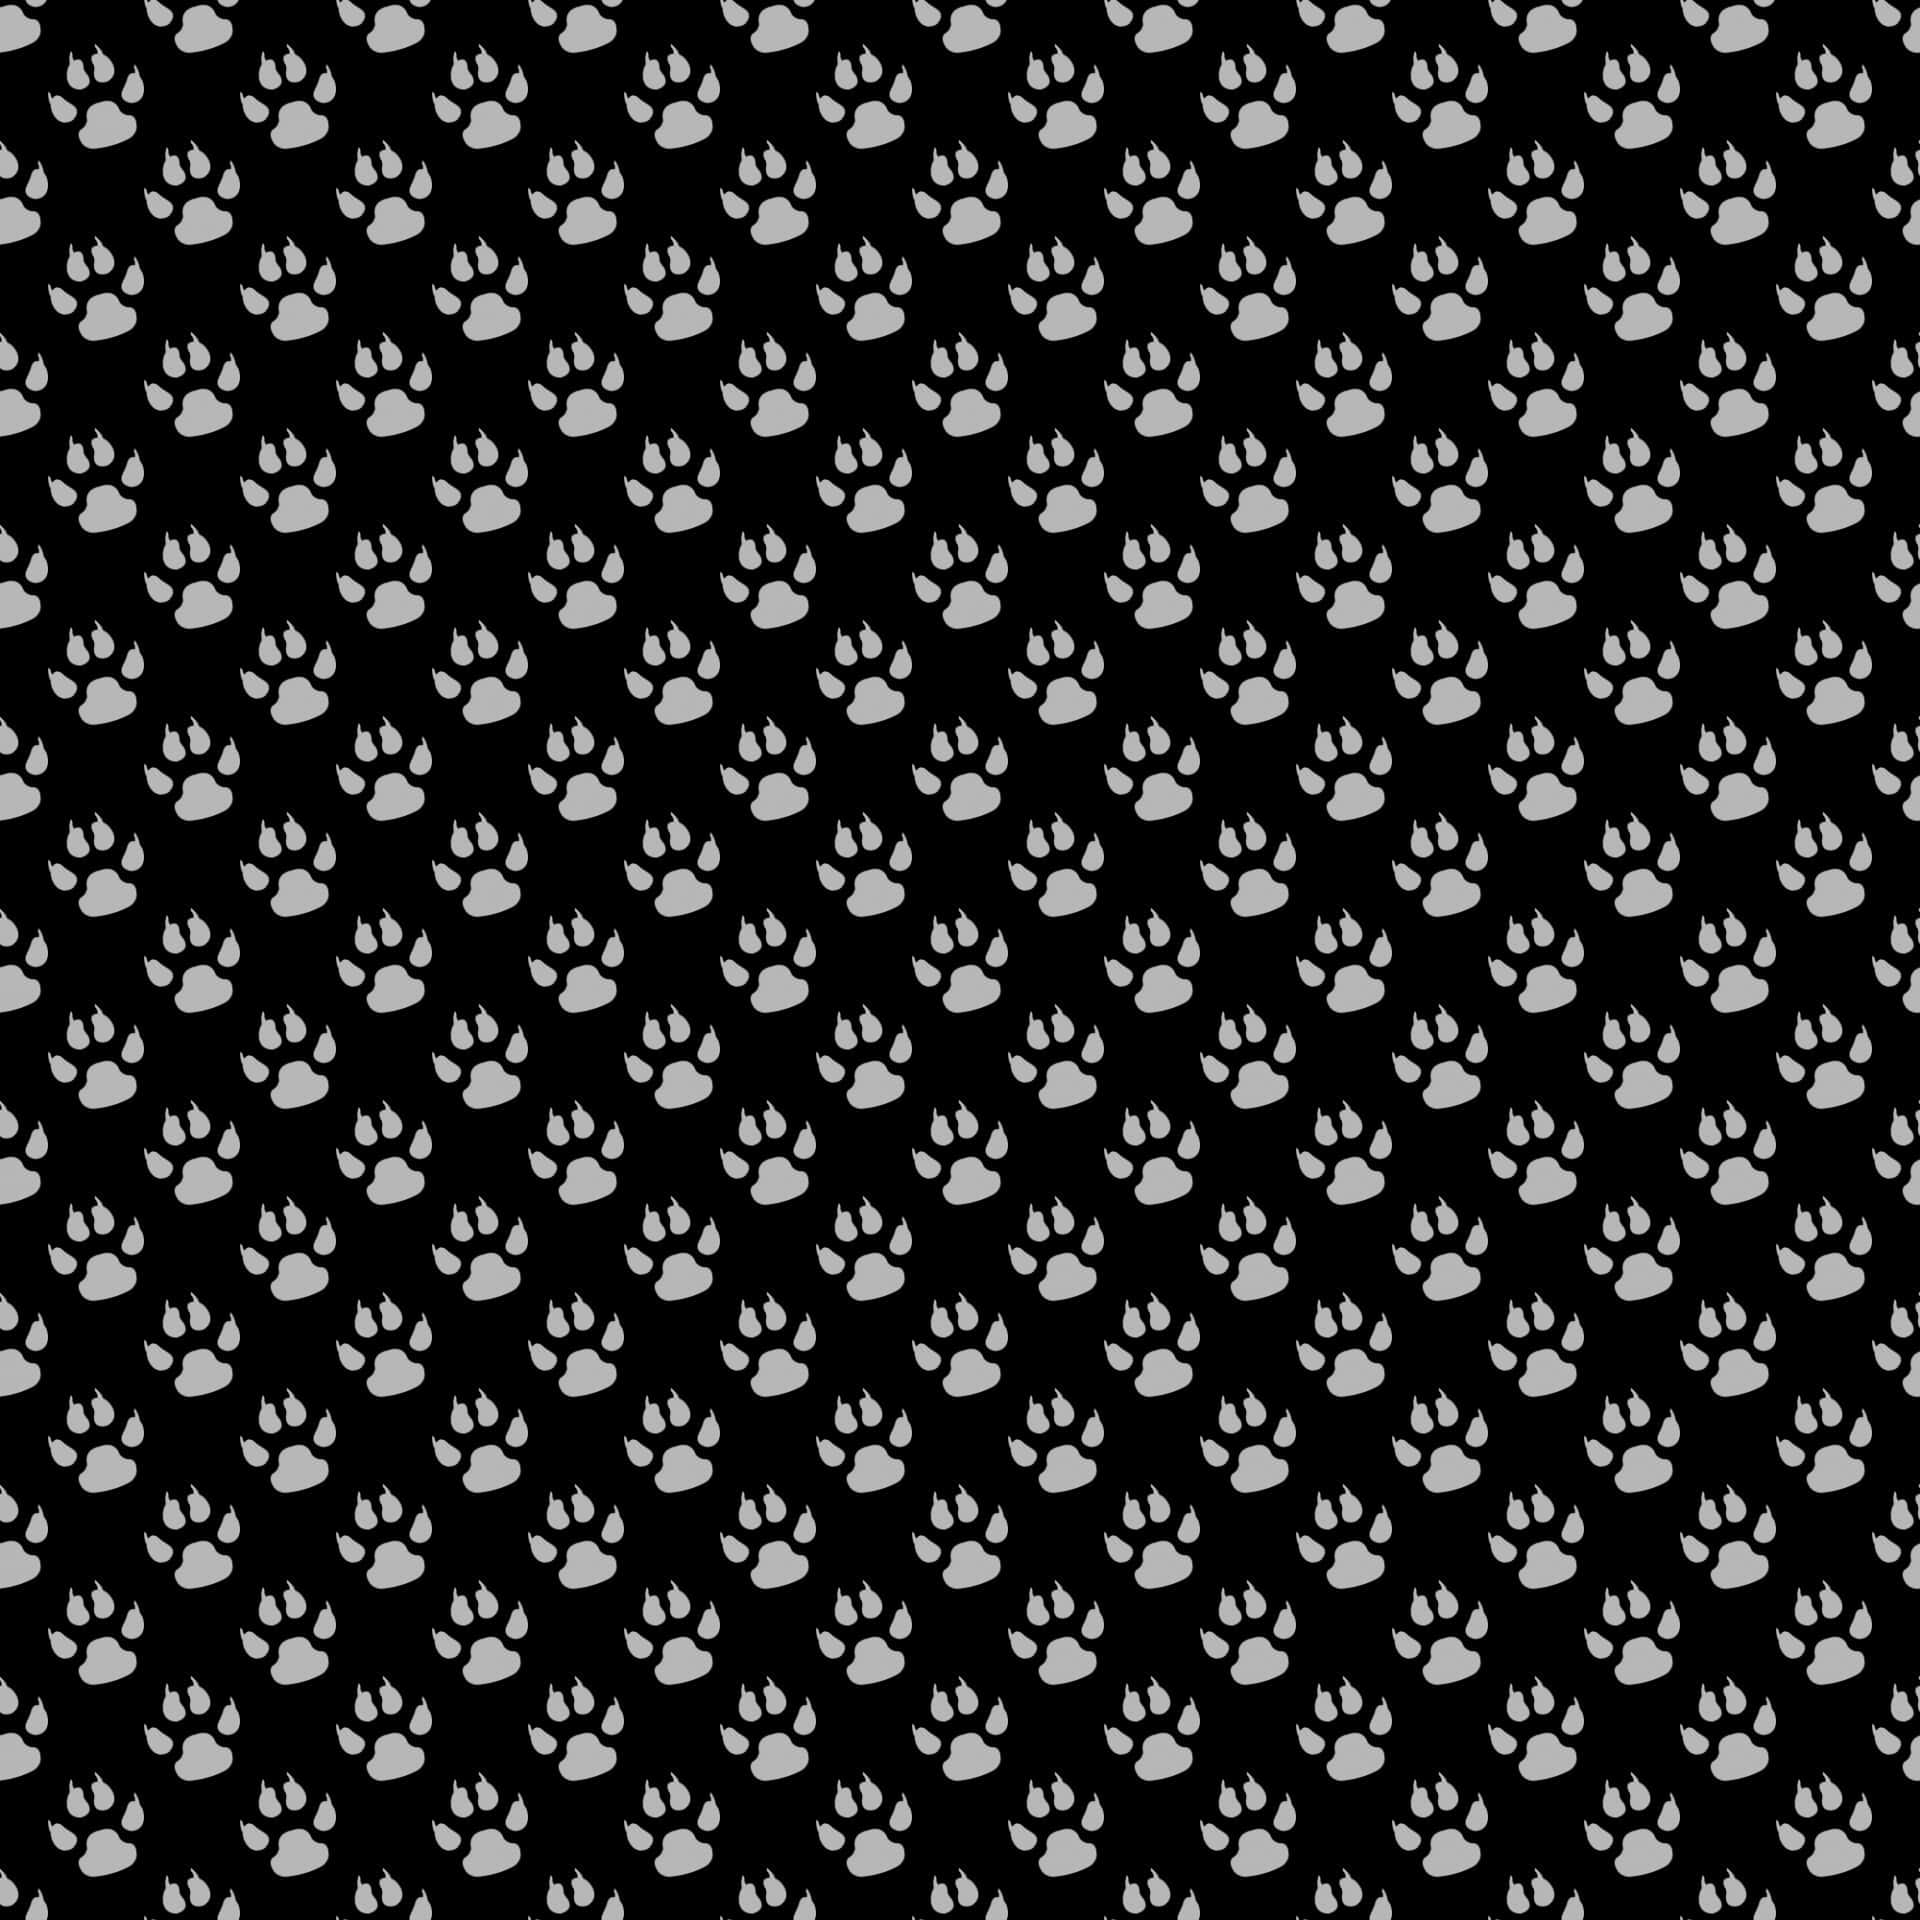 A Black And White Pattern With Paw Prints